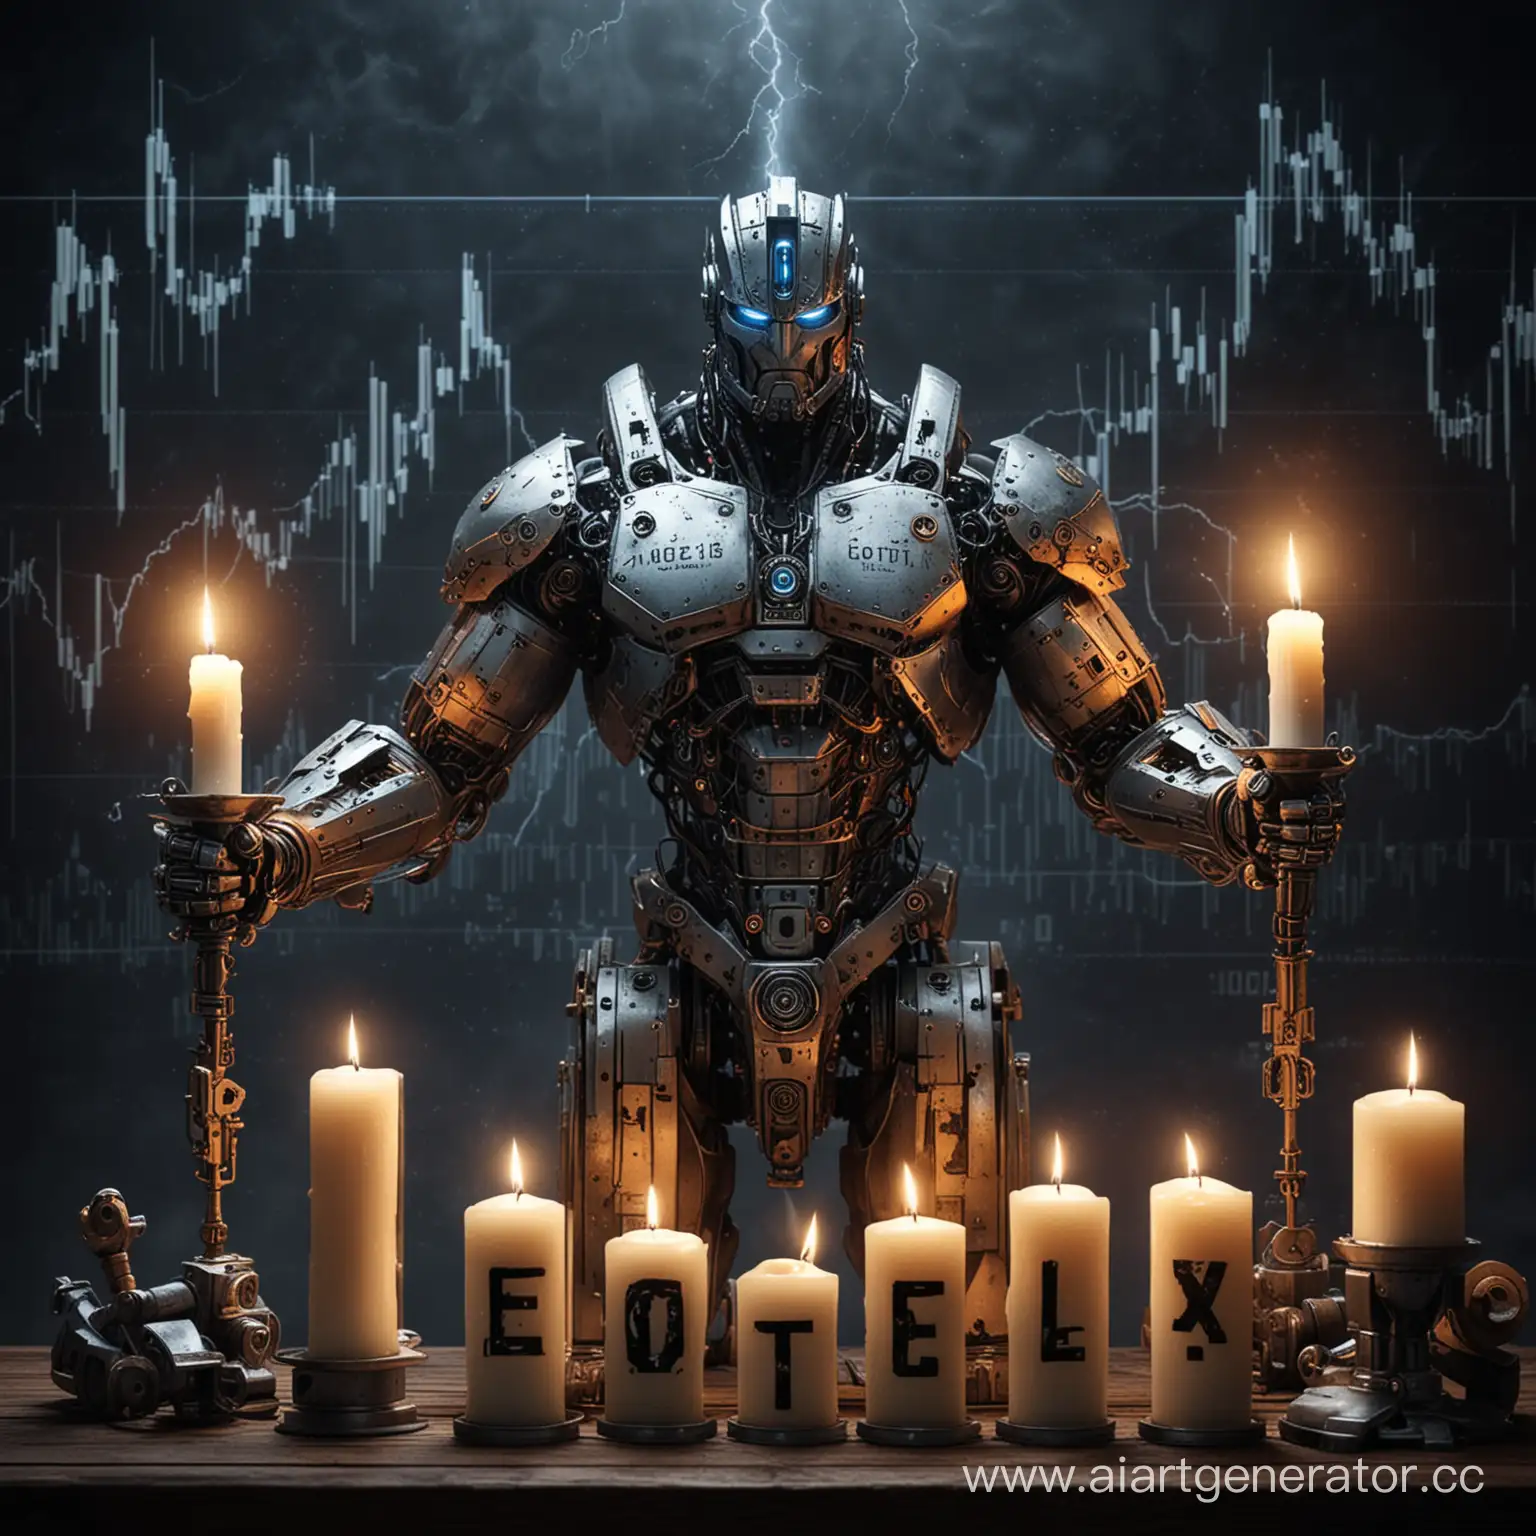 Quotex-Bot-Stock-Chart-with-Zeus-Robot-Monitoring-Trading-Activity